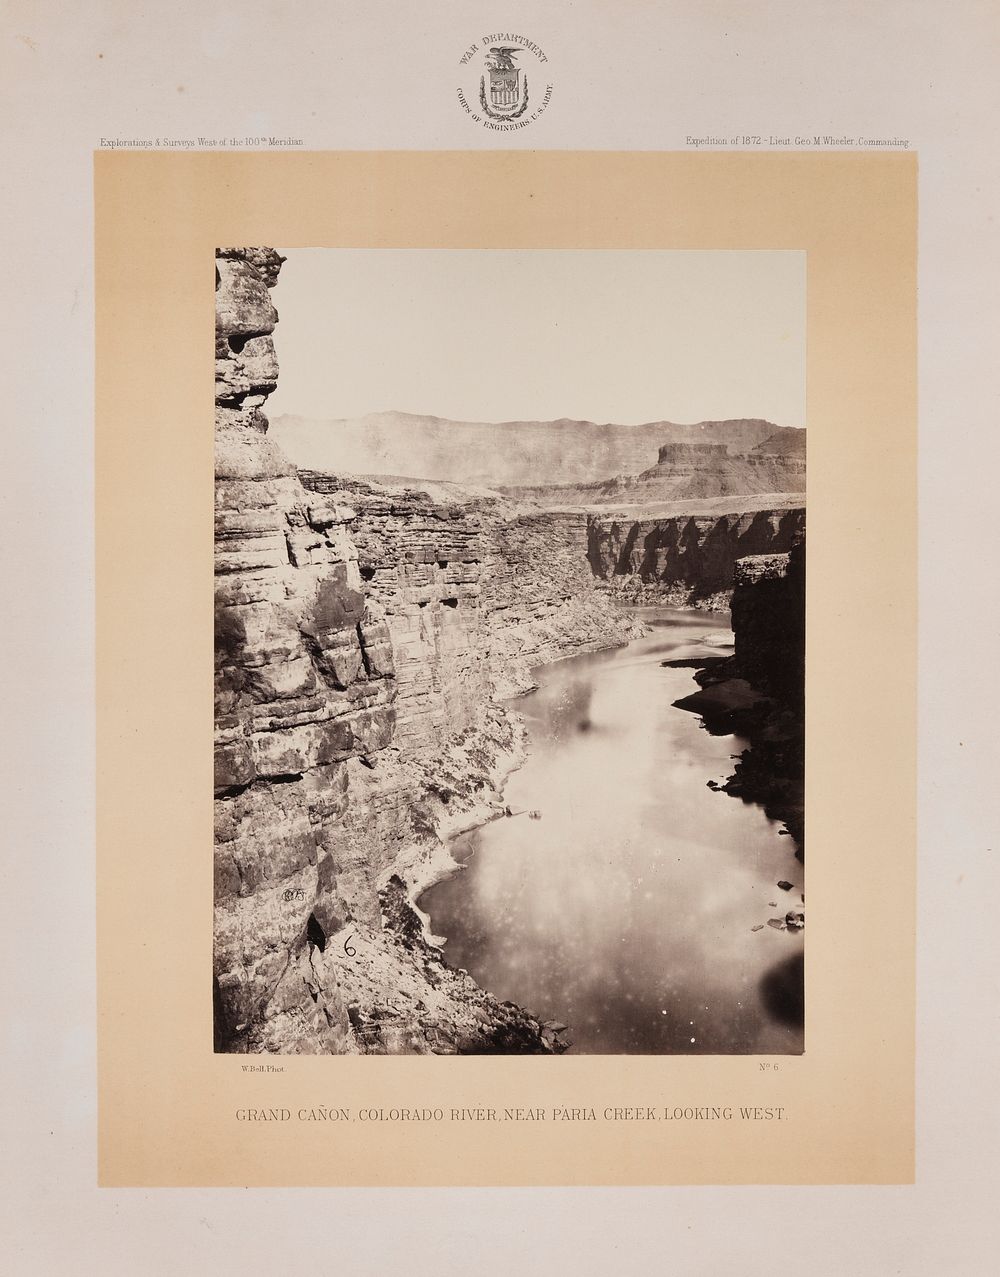 Grand Canon, Colorado River Near Paria Creek, West by William Abraham Bell